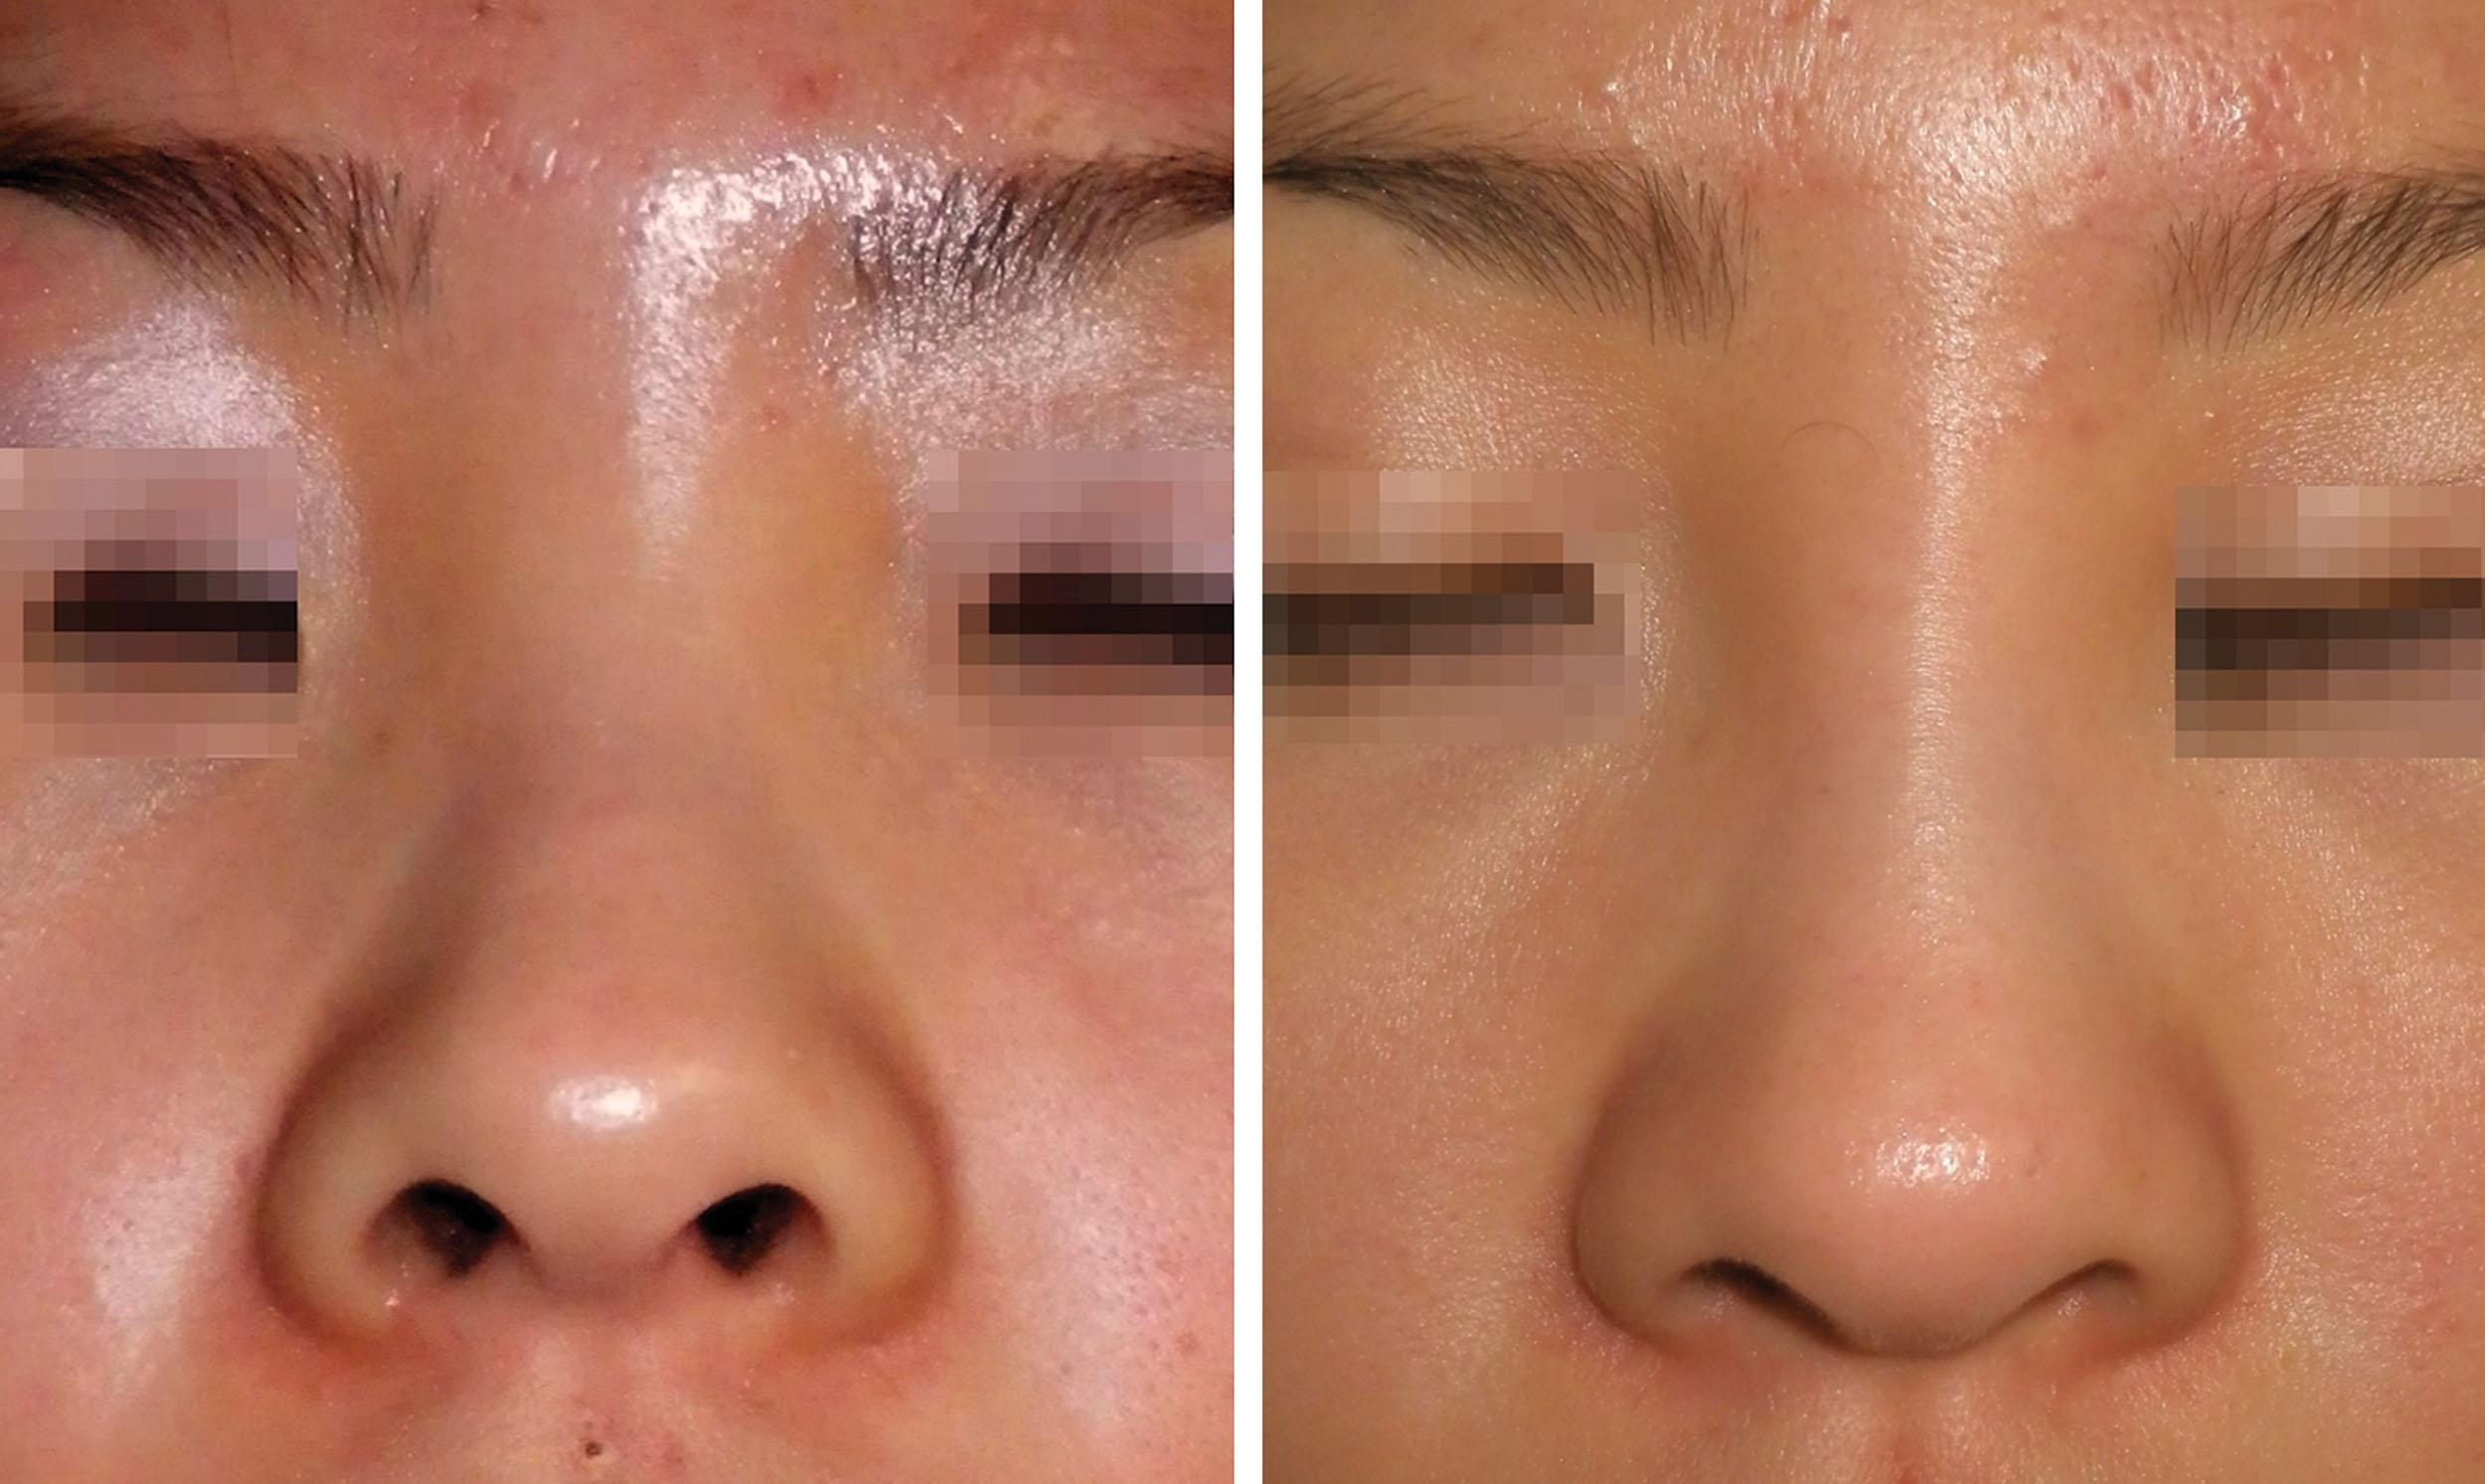 Fig. 10.106, This Asian patient was treated with 1.5 mL of hyaluronic acid filler over two appointments. The patient had a very depressed and almost absent nasal bridge, which was recontoured to a more aesthetic architecture.